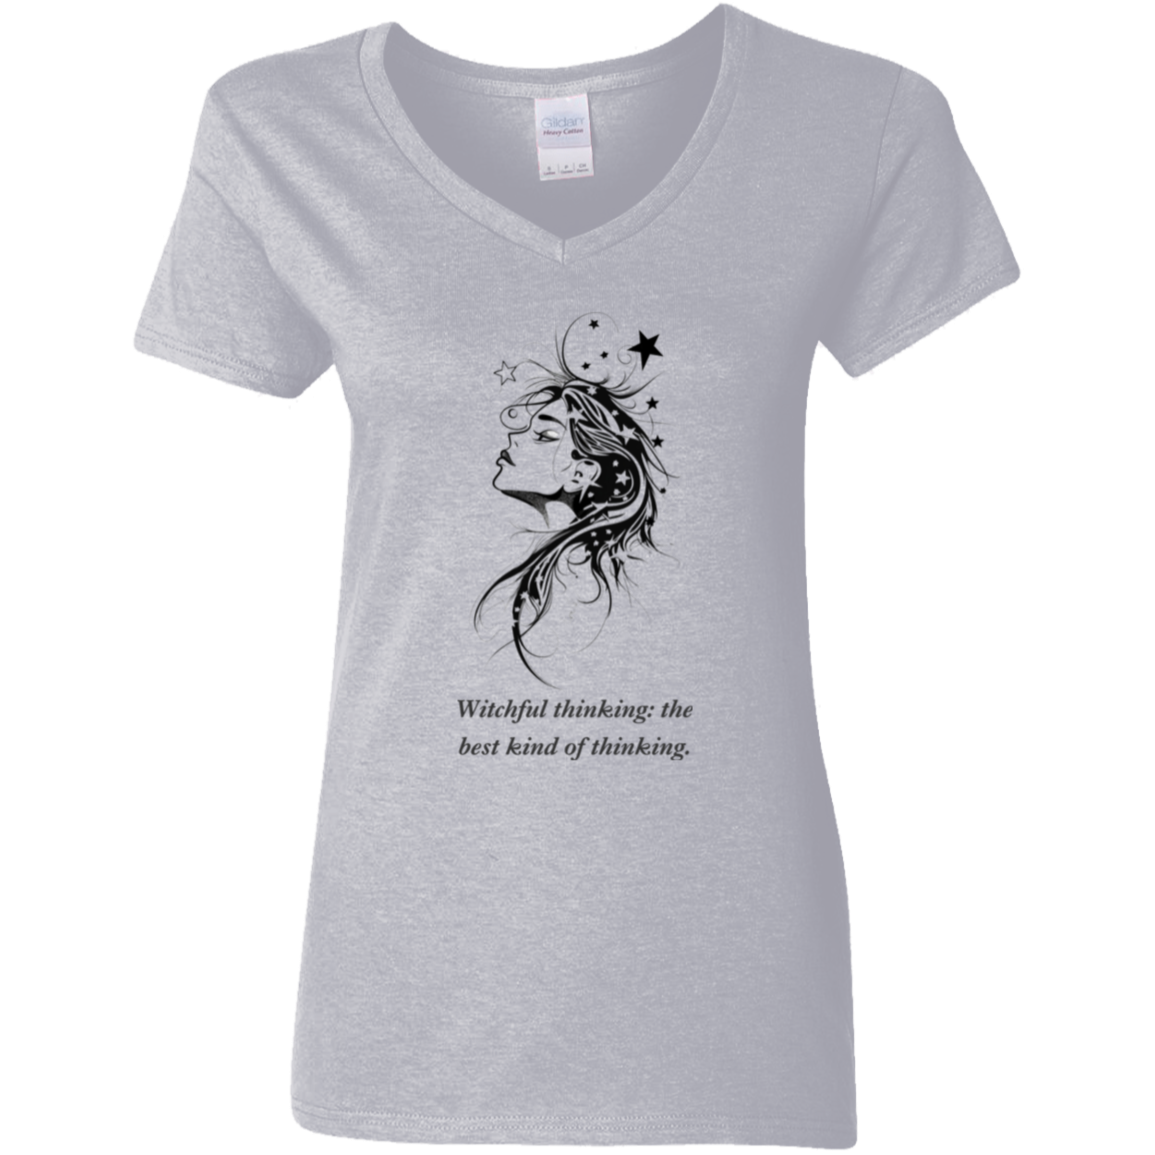 Witchful thinking the best kind of thinking gray graphic design t-shirt from blk moon shop. 